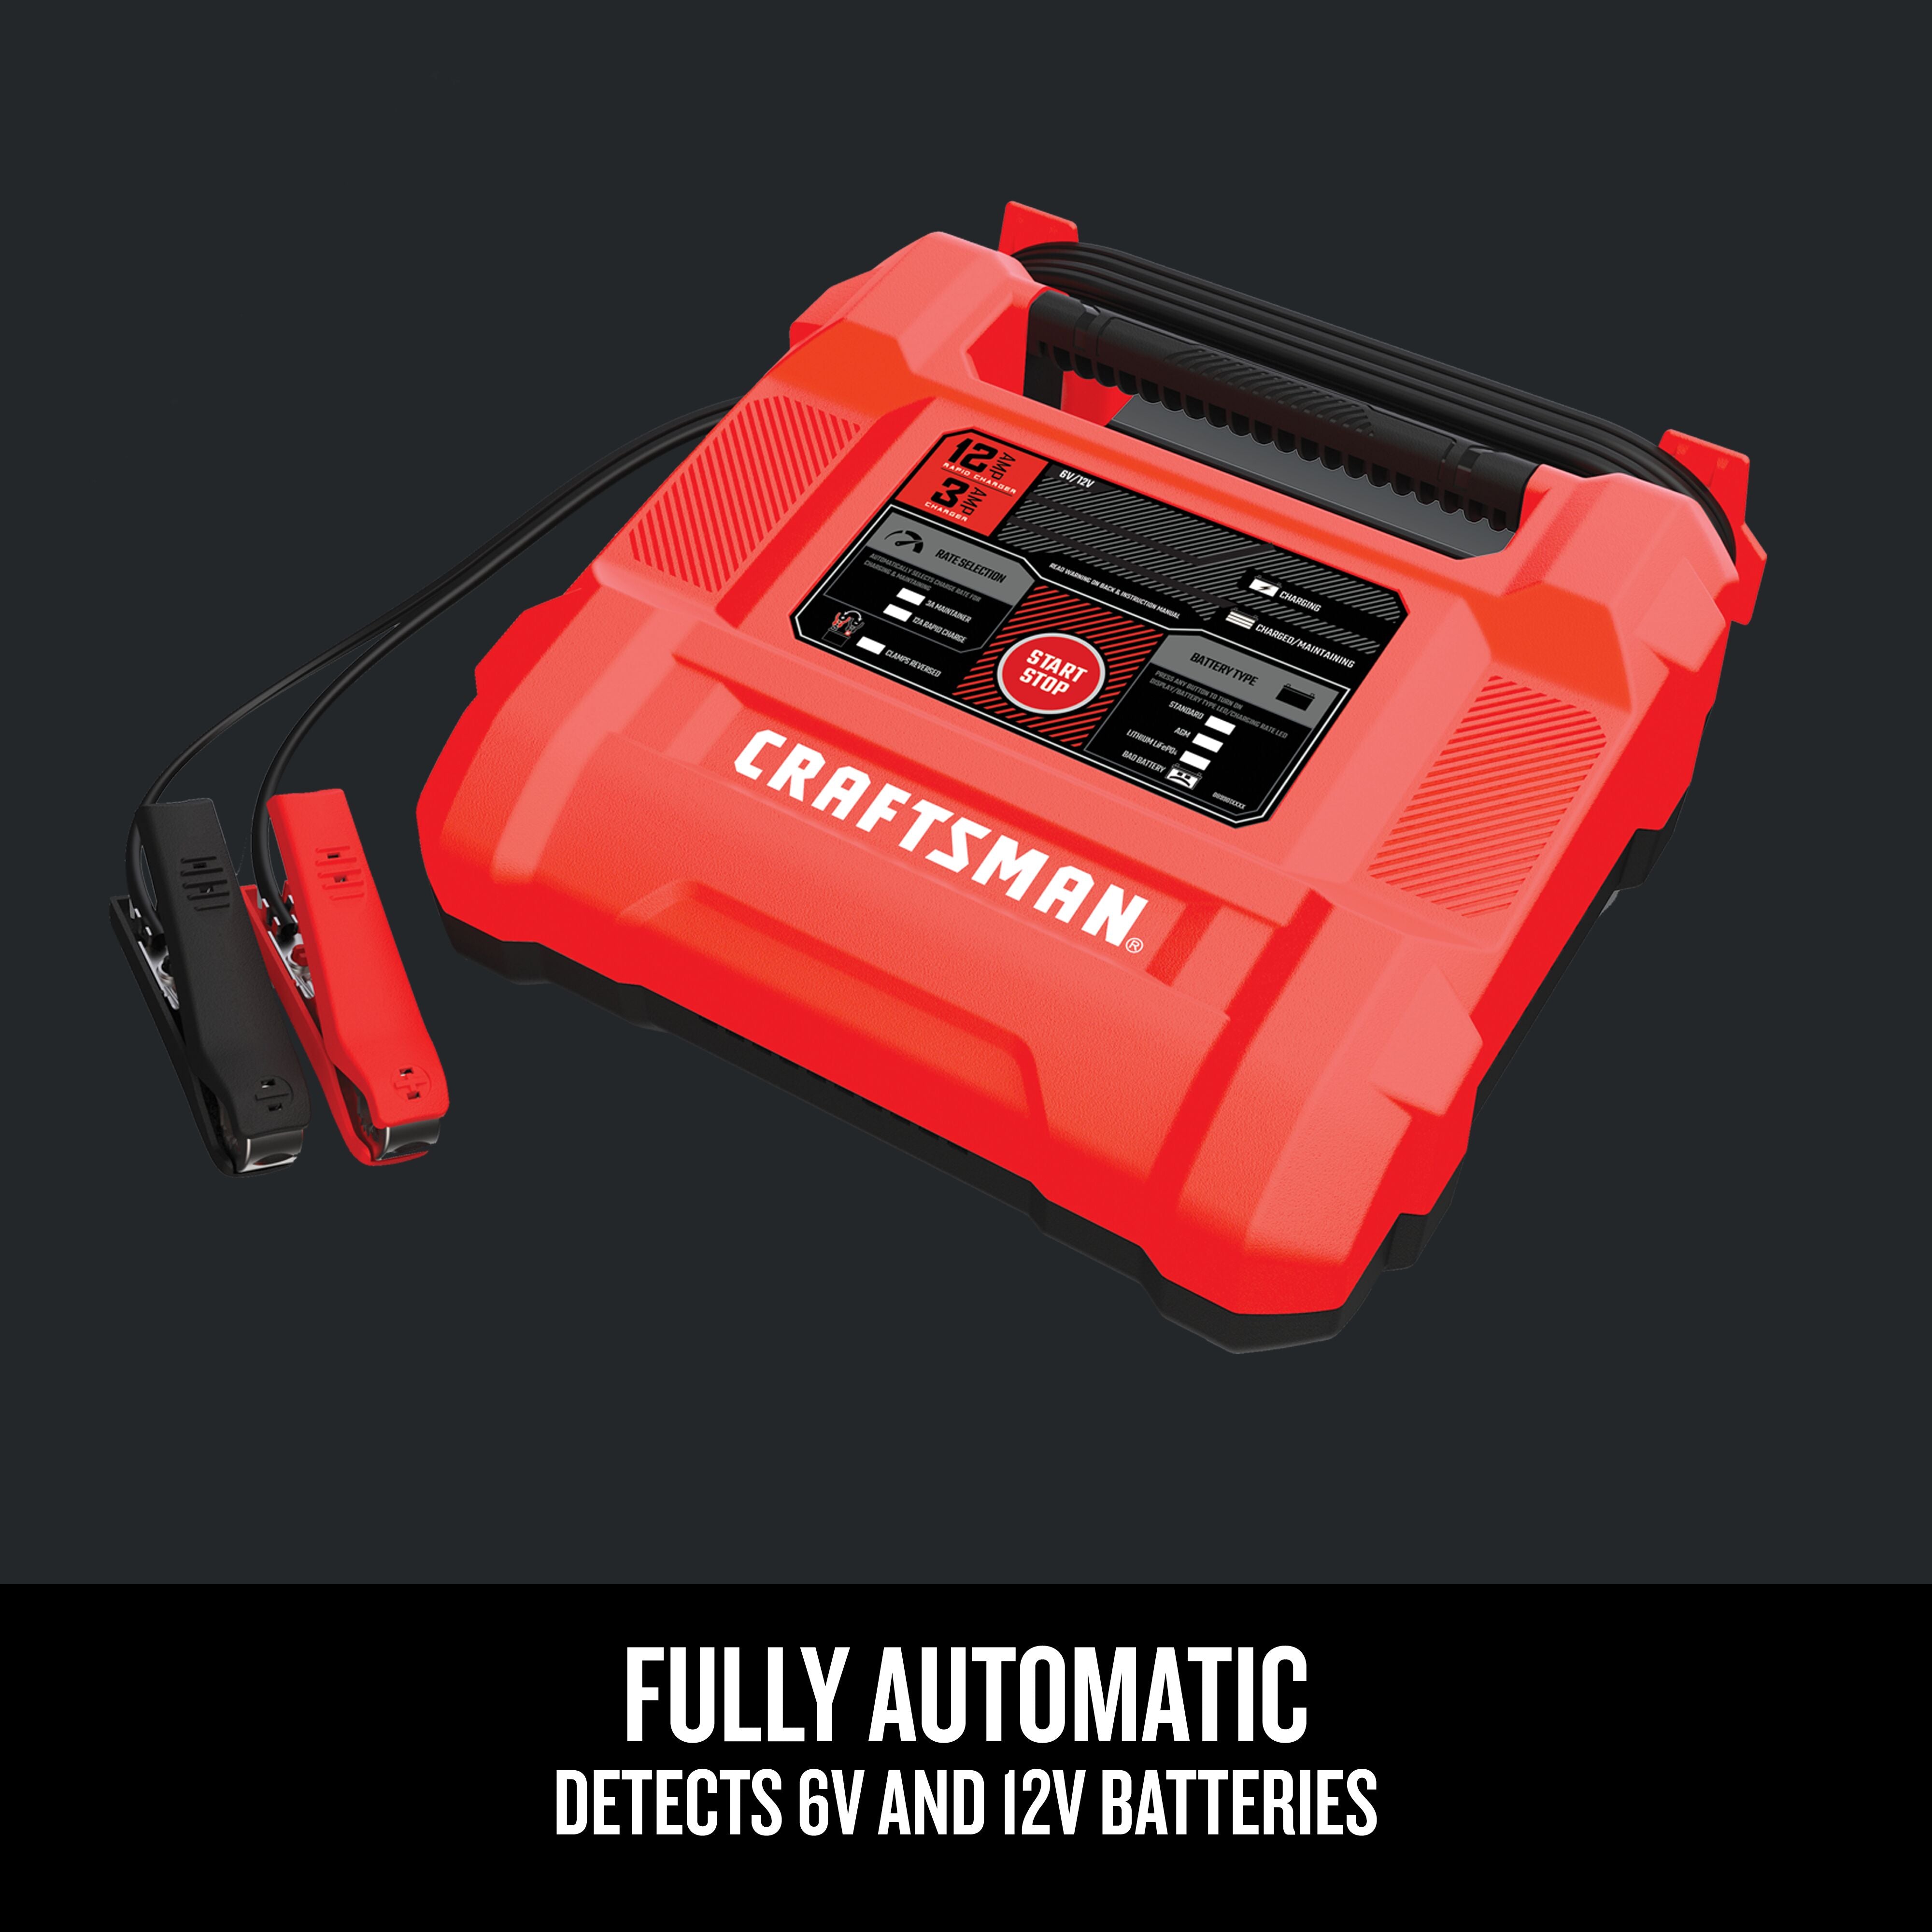 12A 6V/12V Fully Automatic Battery Charger and Maintainer fully automatic graphic